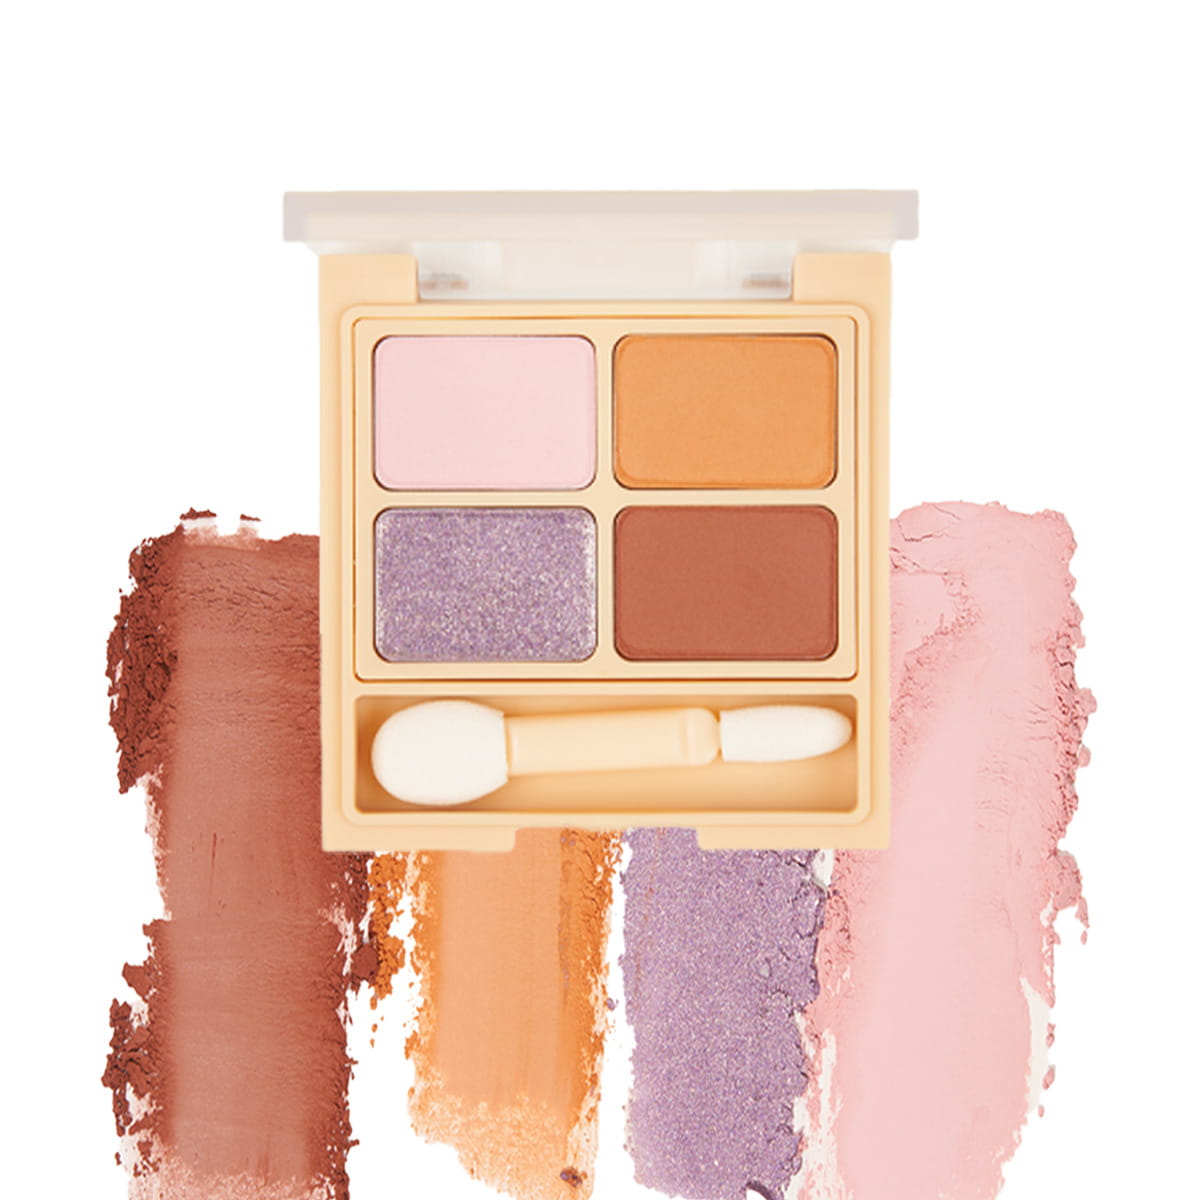 INTO YOU Shero 4-Color Eyeshadow Palette